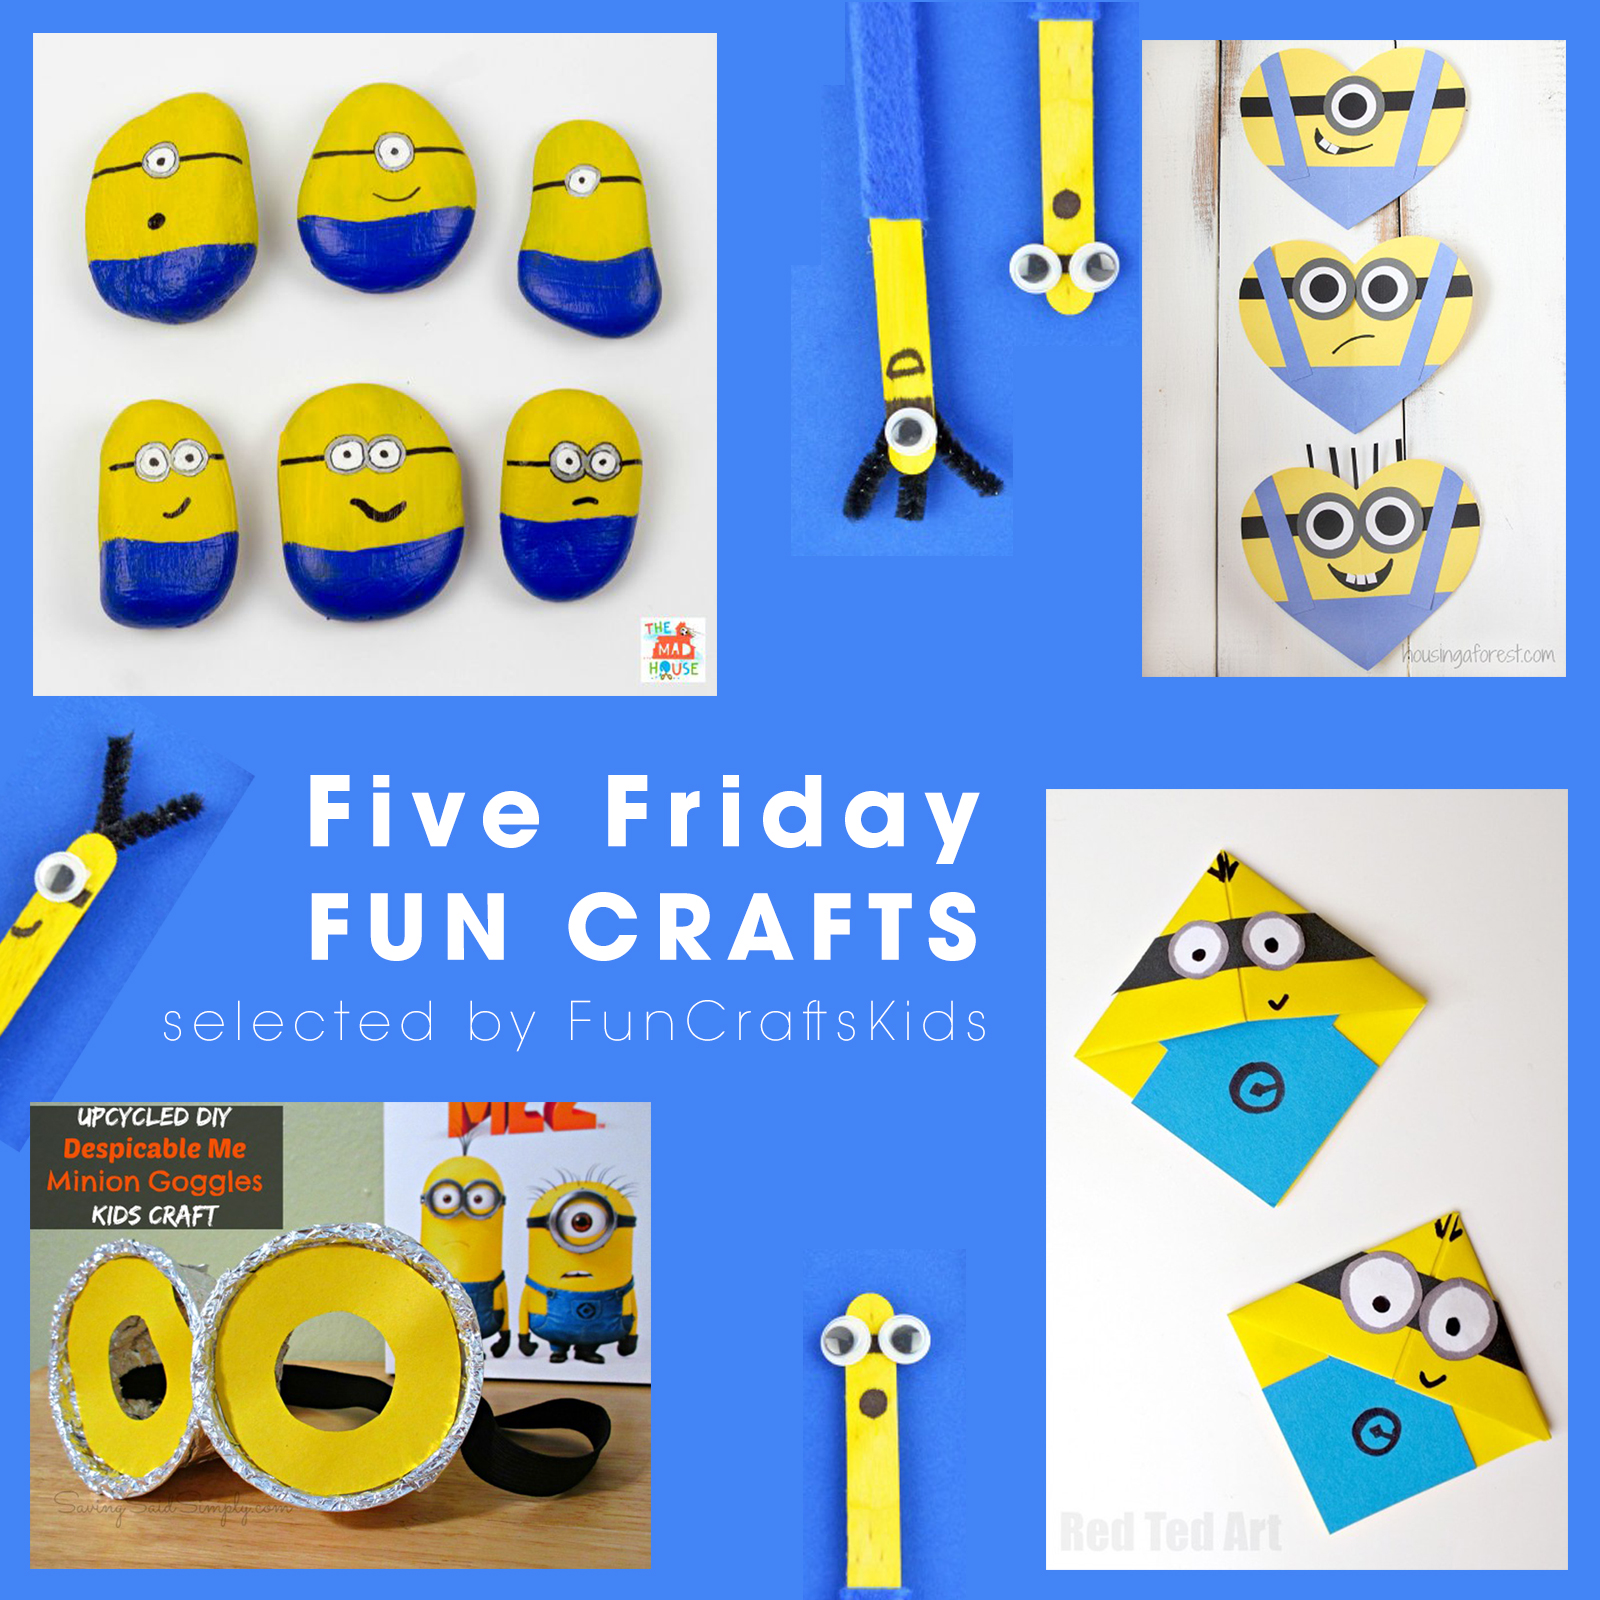 Minions: Five Fun Crafts For Friday From FunCraftsKids